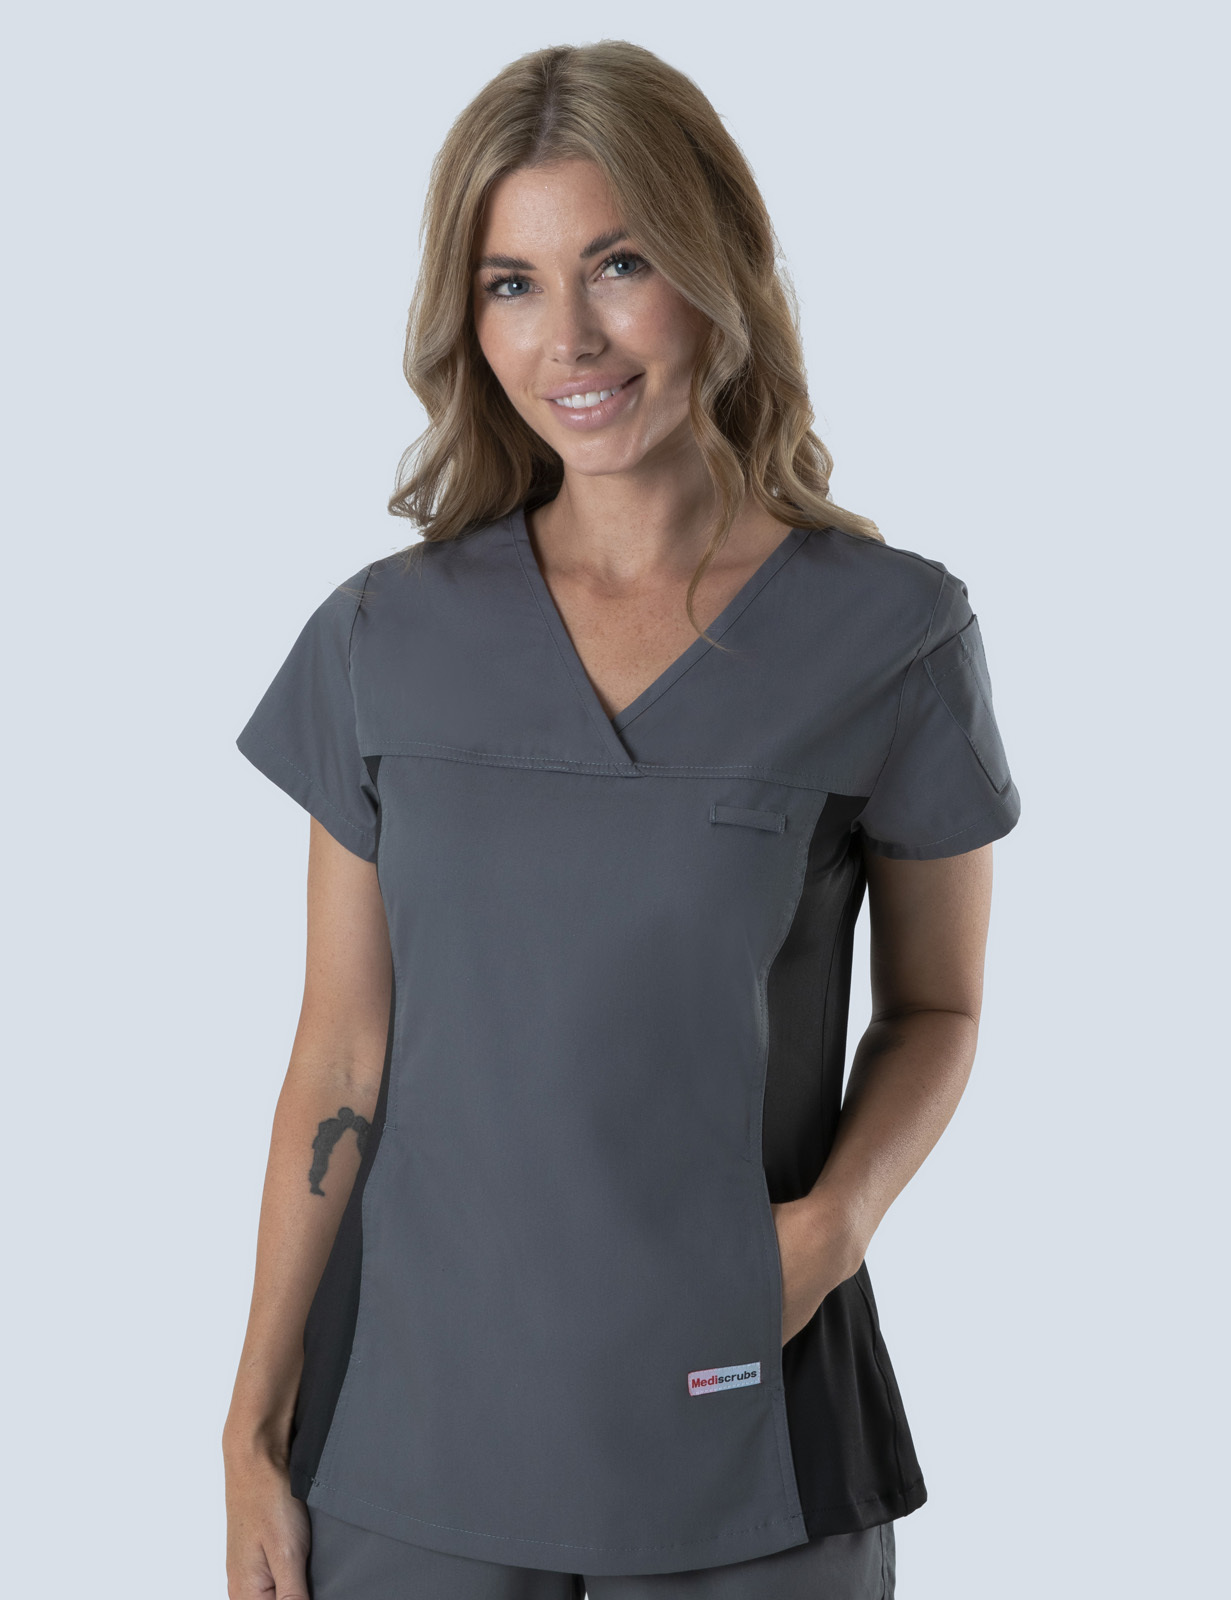 Women's Fit Solid Scrub Top With Spandex Panel - Steel Grey - X Small